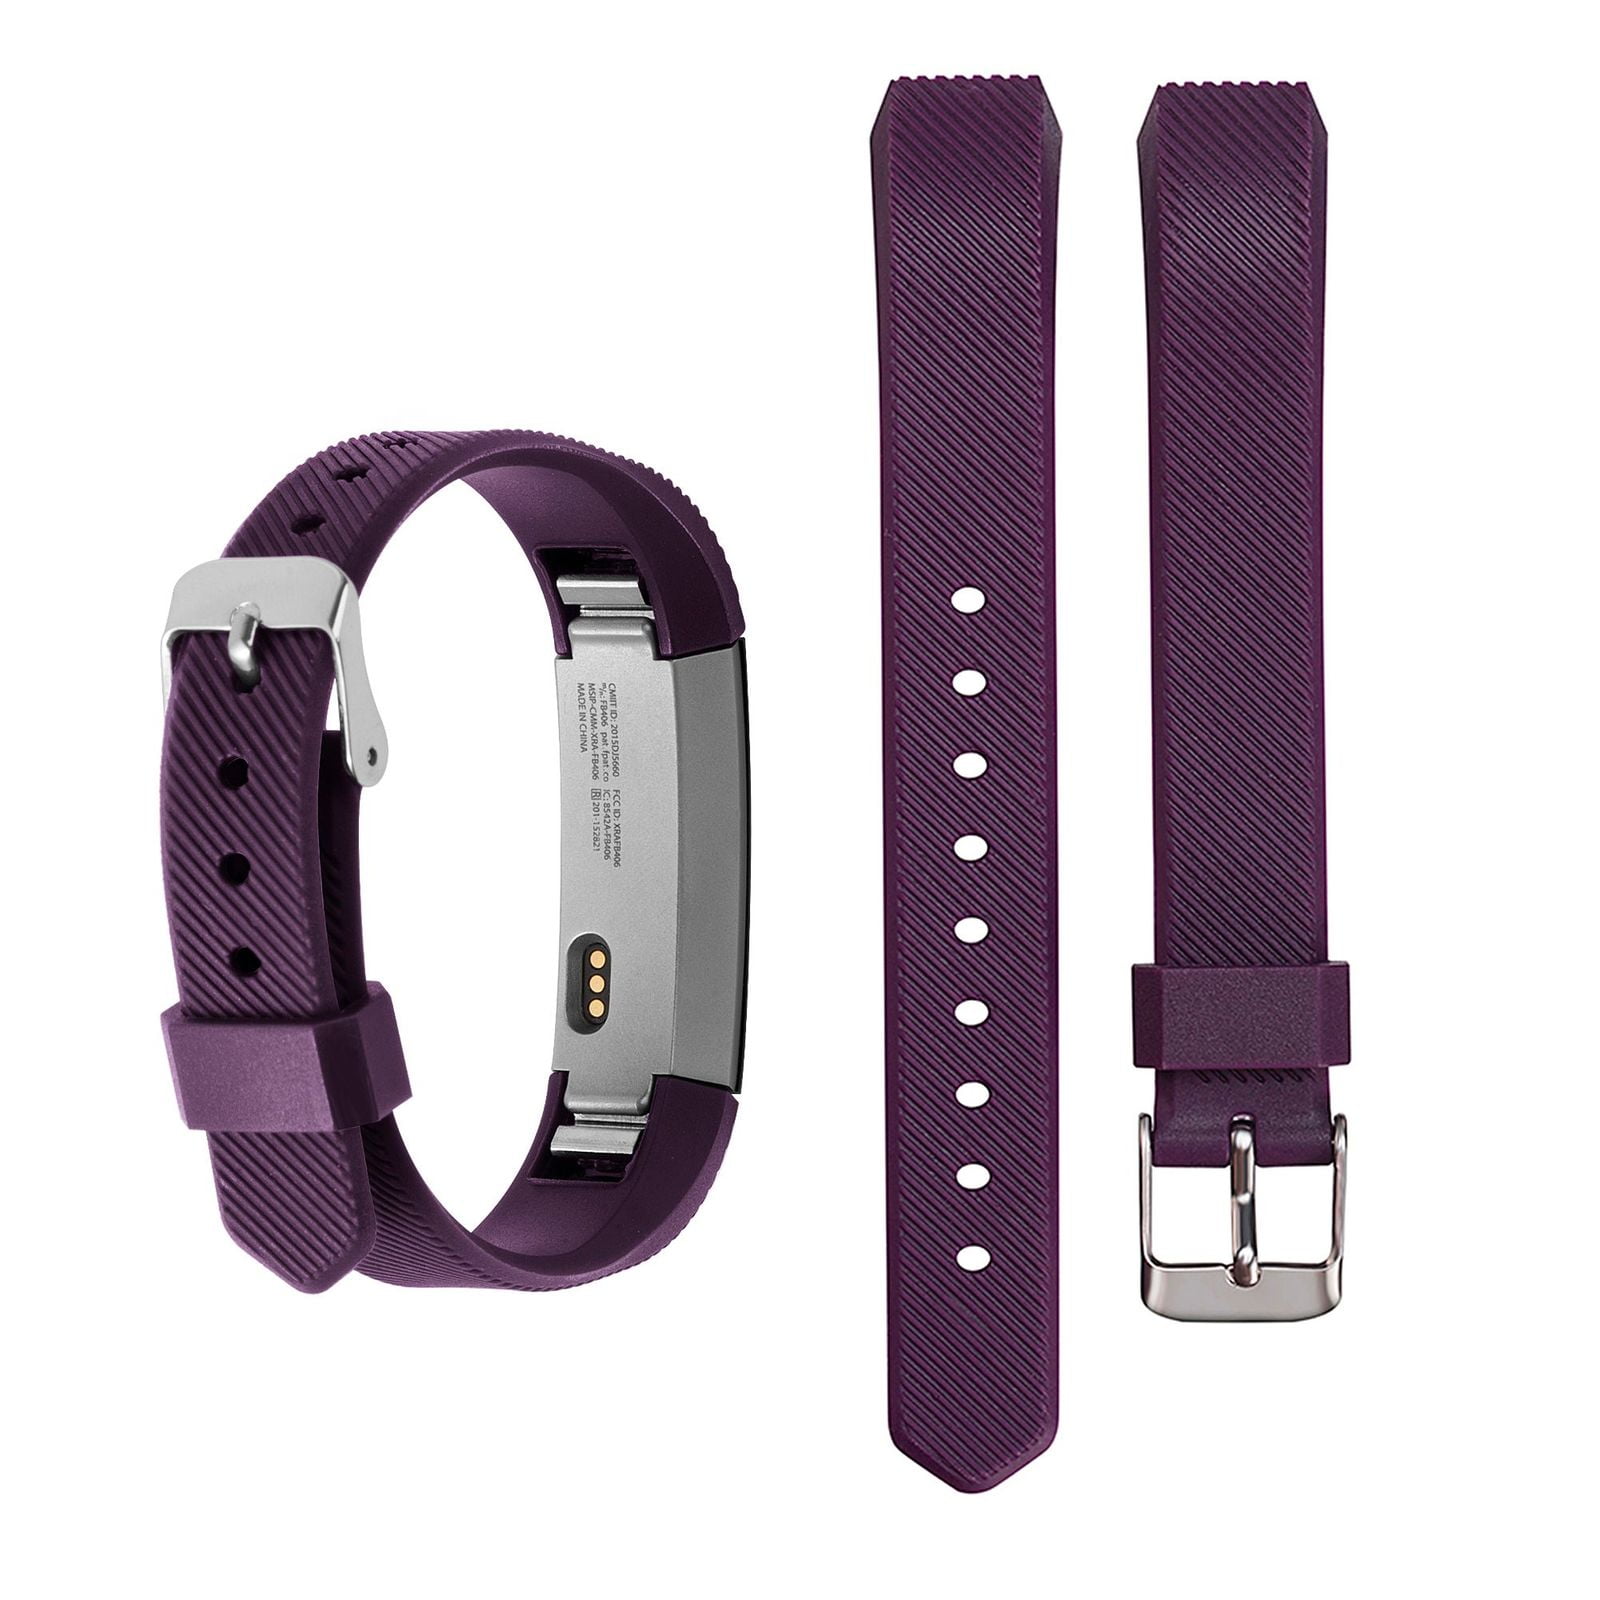 Replacement Colour Pattern Straps for the Fitbit Alta Wristband Secure Clasp 